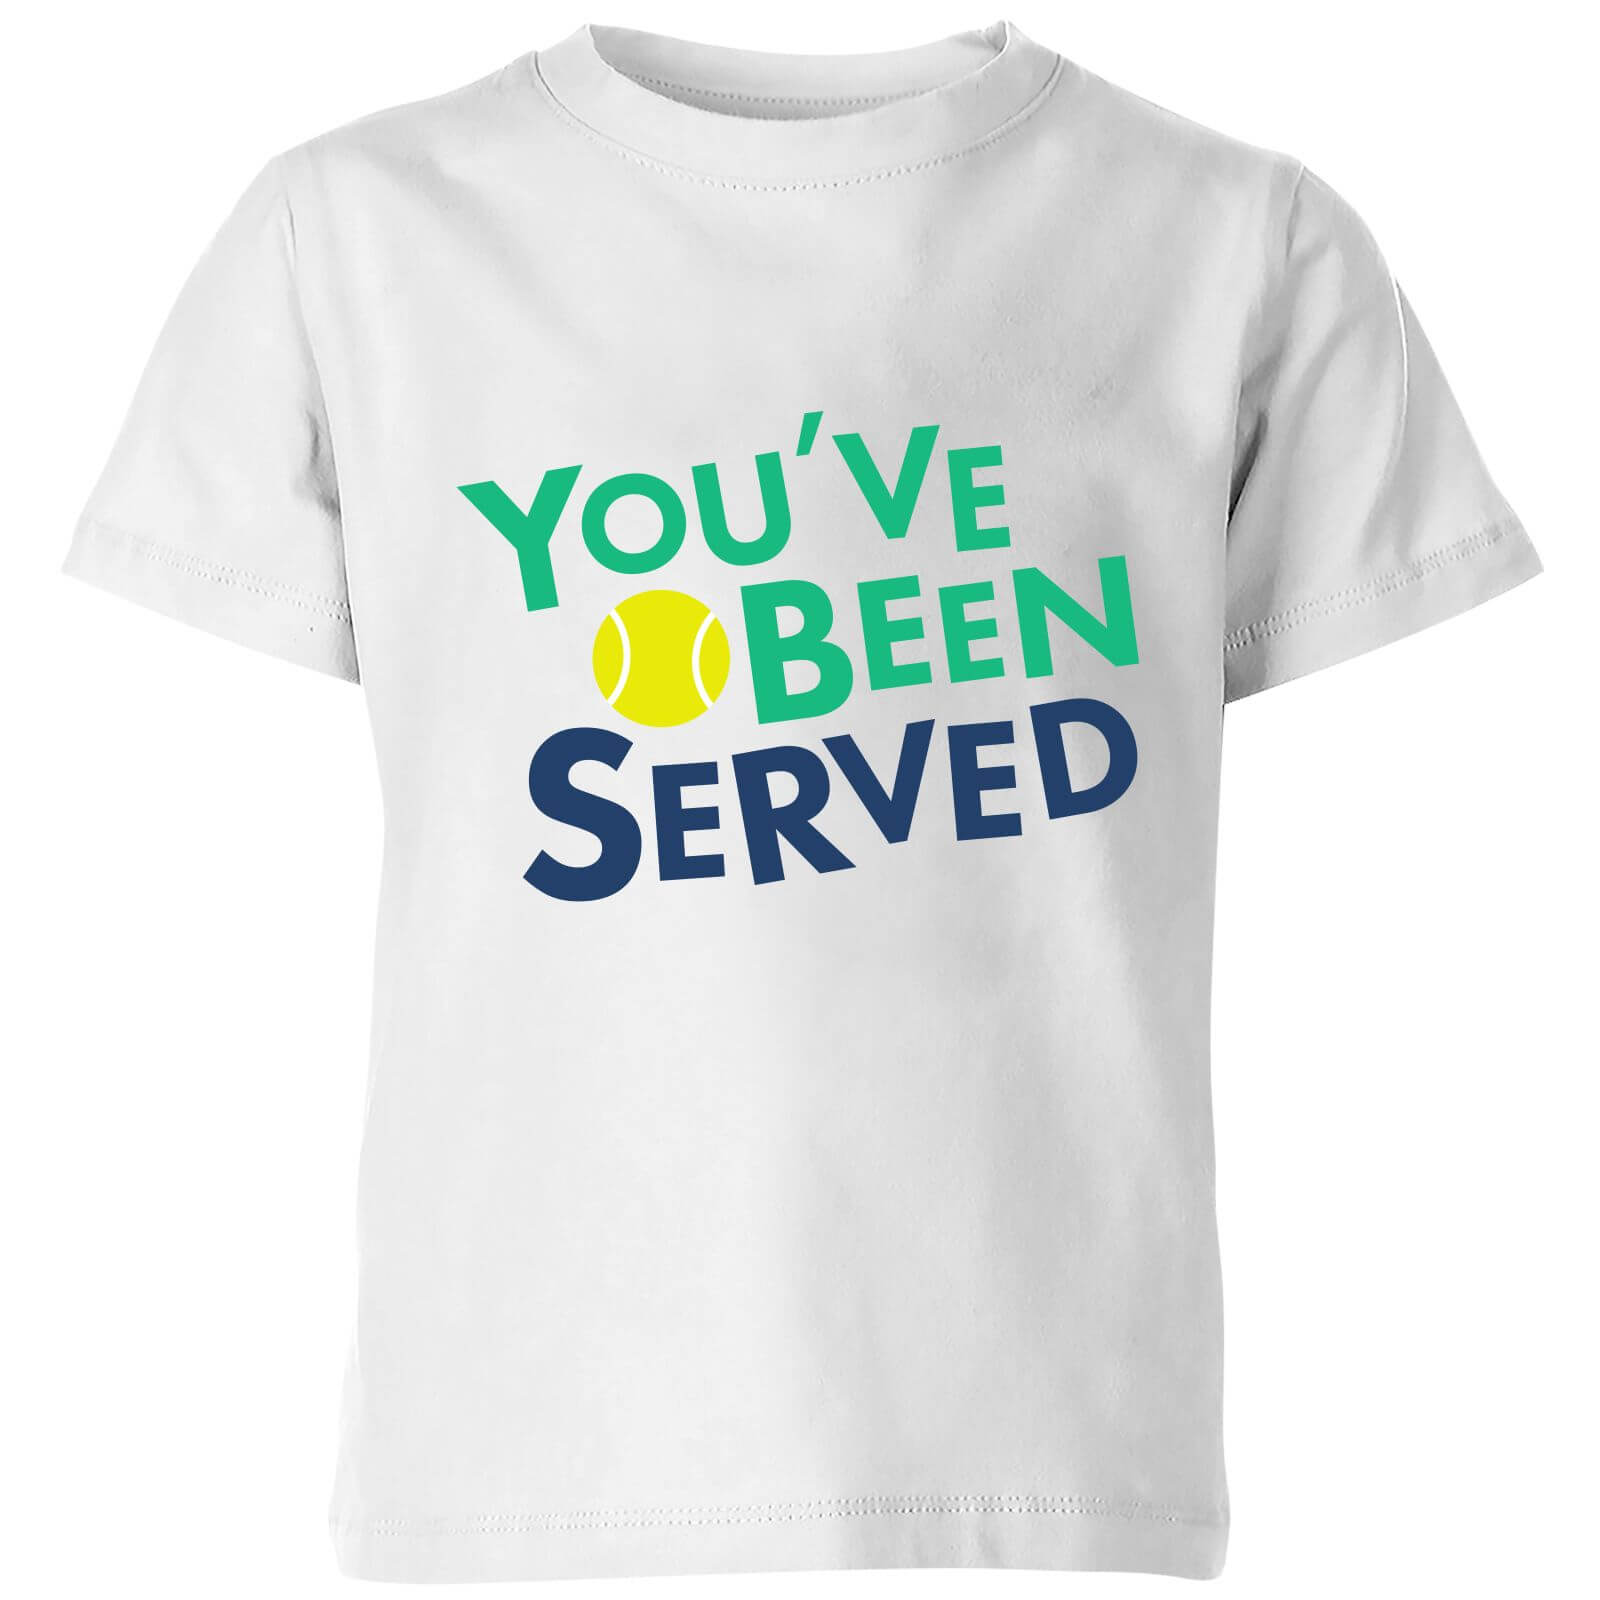 You've Been Served Kids' T-Shirt - White - 3-4 Years - White